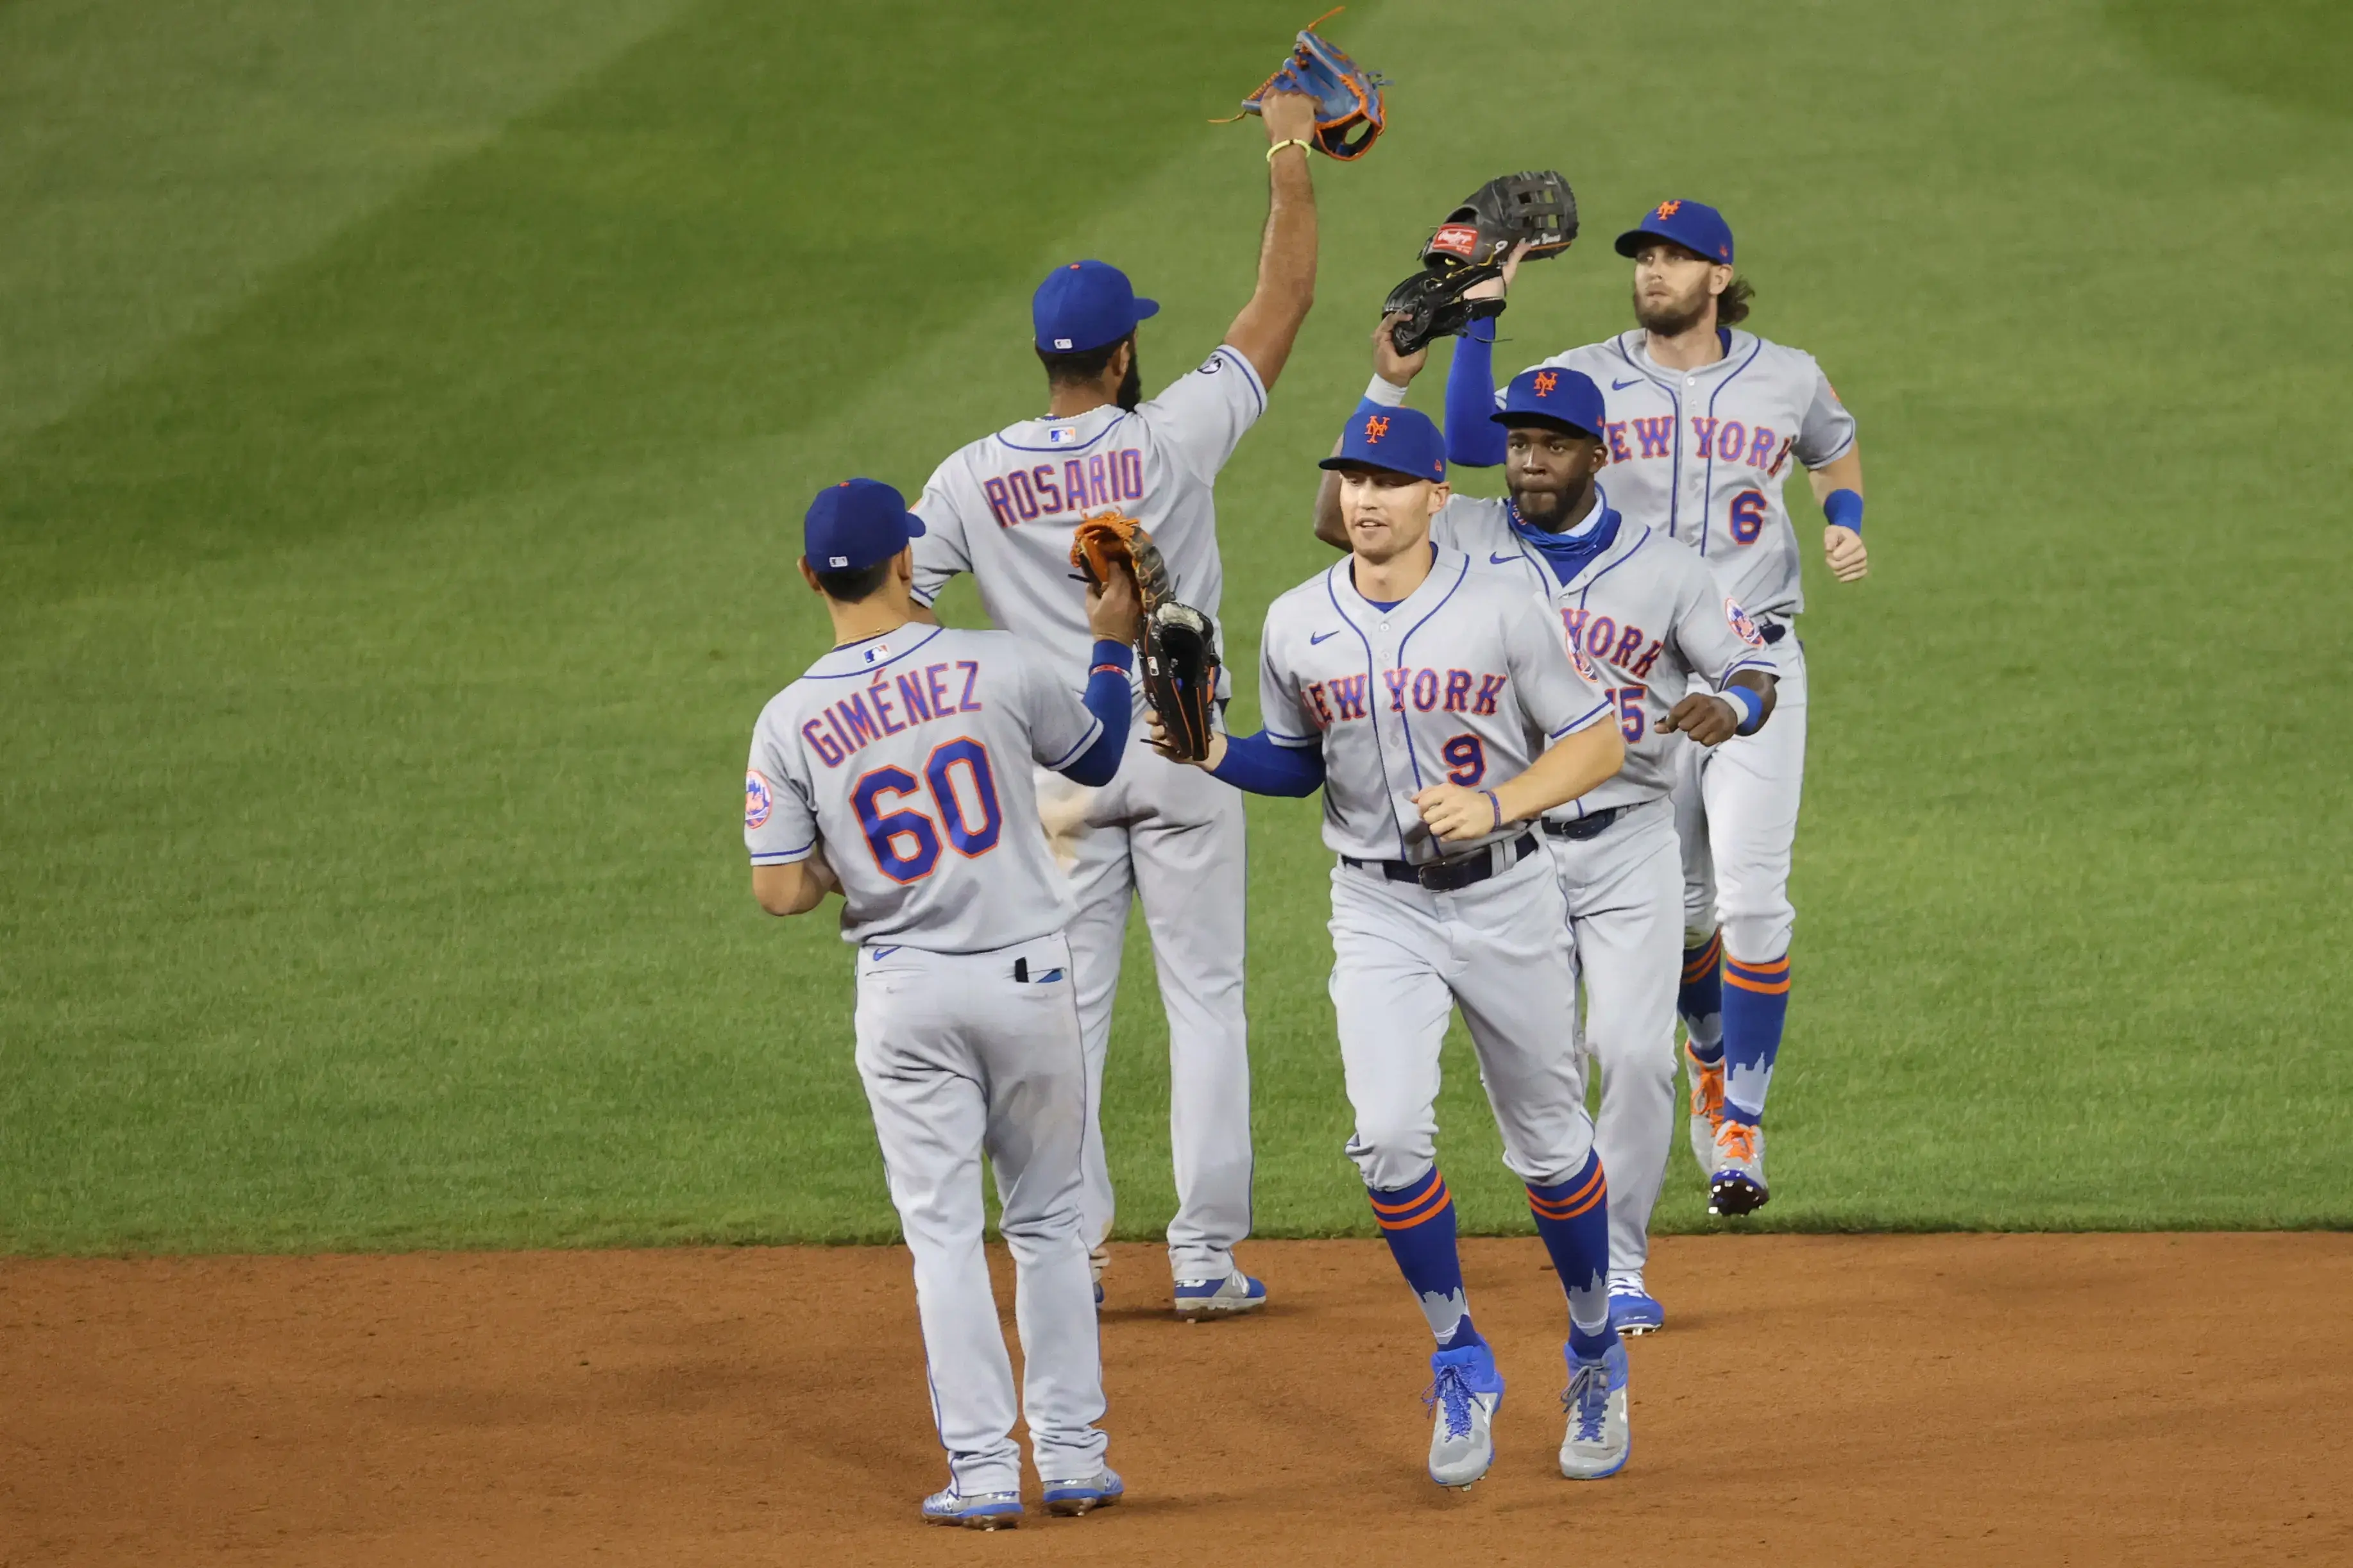 The Mets celebrate a win over the Nationals in Washington, D.C. / USA Today